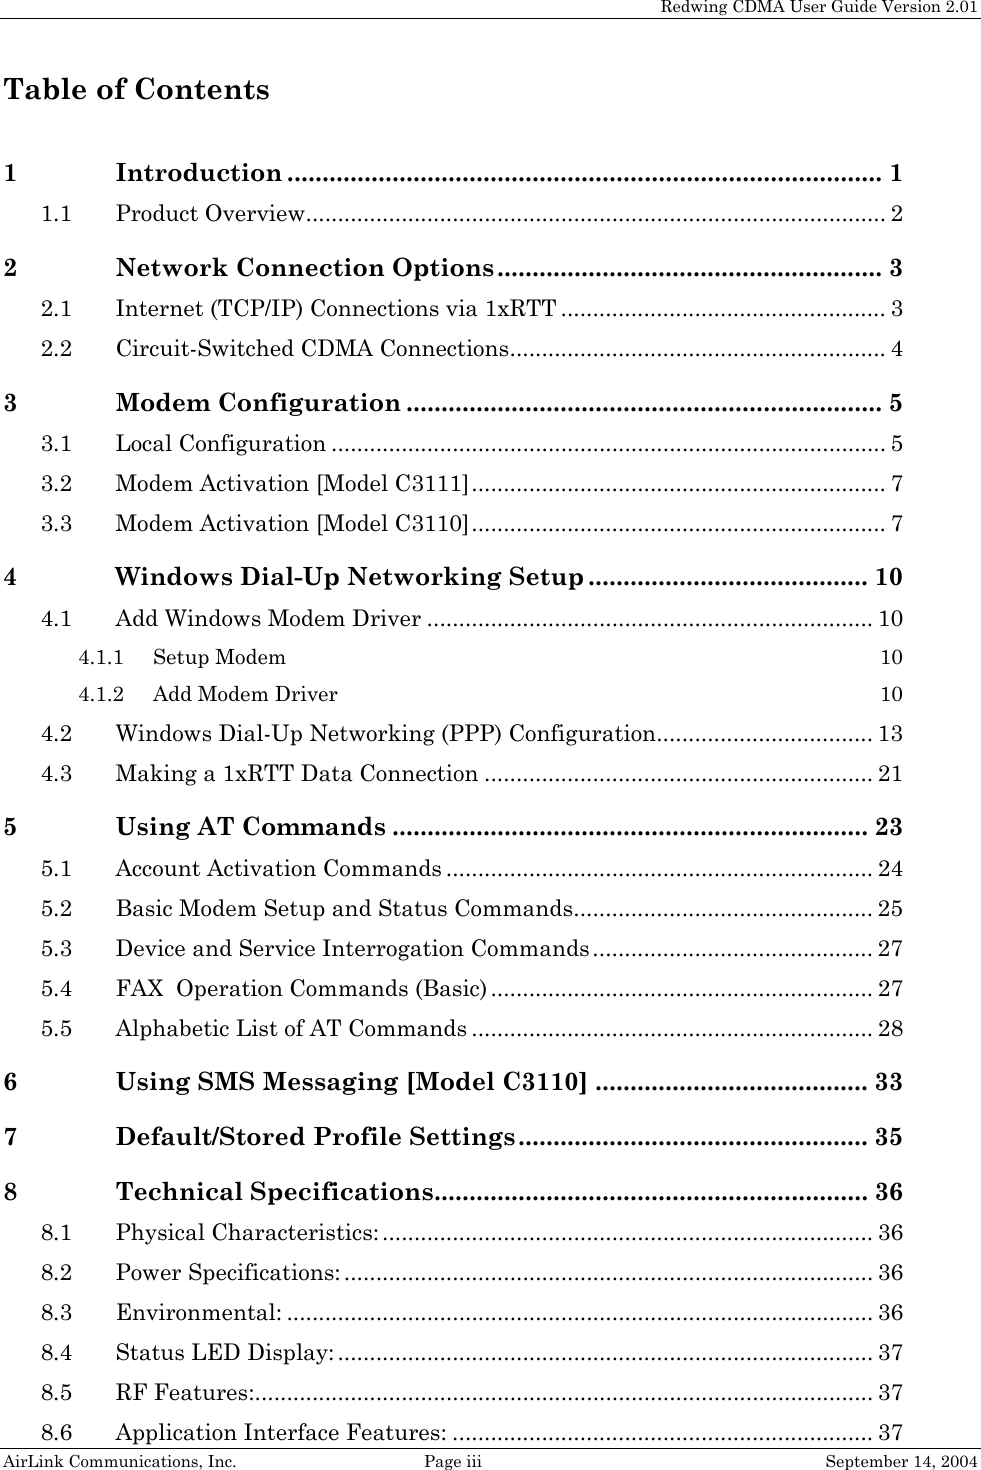   Redwing CDMA User Guide Version 2.01 AirLink Communications, Inc.  Page iii  September 14, 2004 Table of Contents  1 Introduction ..................................................................................... 1 1.1 Product Overview........................................................................................... 2 2 Network Connection Options....................................................... 3 2.1 Internet (TCP/IP) Connections via 1xRTT ................................................... 3 2.2 Circuit-Switched CDMA Connections........................................................... 4 3 Modem Configuration .................................................................... 5 3.1 Local Configuration ....................................................................................... 5 3.2 Modem Activation [Model C3111]................................................................. 7 3.3 Modem Activation [Model C3110]................................................................. 7 4 Windows Dial-Up Networking Setup ........................................ 10 4.1 Add Windows Modem Driver ...................................................................... 10 4.1.1 Setup Modem 10 4.1.2 Add Modem Driver 10 4.2 Windows Dial-Up Networking (PPP) Configuration.................................. 13 4.3 Making a 1xRTT Data Connection ............................................................. 21 5 Using AT Commands .................................................................... 23 5.1 Account Activation Commands ................................................................... 24 5.2 Basic Modem Setup and Status Commands............................................... 25 5.3 Device and Service Interrogation Commands ............................................ 27 5.4 FAX  Operation Commands (Basic) ............................................................ 27 5.5 Alphabetic List of AT Commands ............................................................... 28 6 Using SMS Messaging [Model C3110] ....................................... 33 7 Default/Stored Profile Settings.................................................. 35 8 Technical Specifications.............................................................. 36 8.1 Physical Characteristics: ............................................................................. 36 8.2 Power Specifications: ................................................................................... 36 8.3 Environmental: ............................................................................................ 36 8.4 Status LED Display: .................................................................................... 37 8.5 RF Features:................................................................................................. 37 8.6 Application Interface Features: .................................................................. 37 